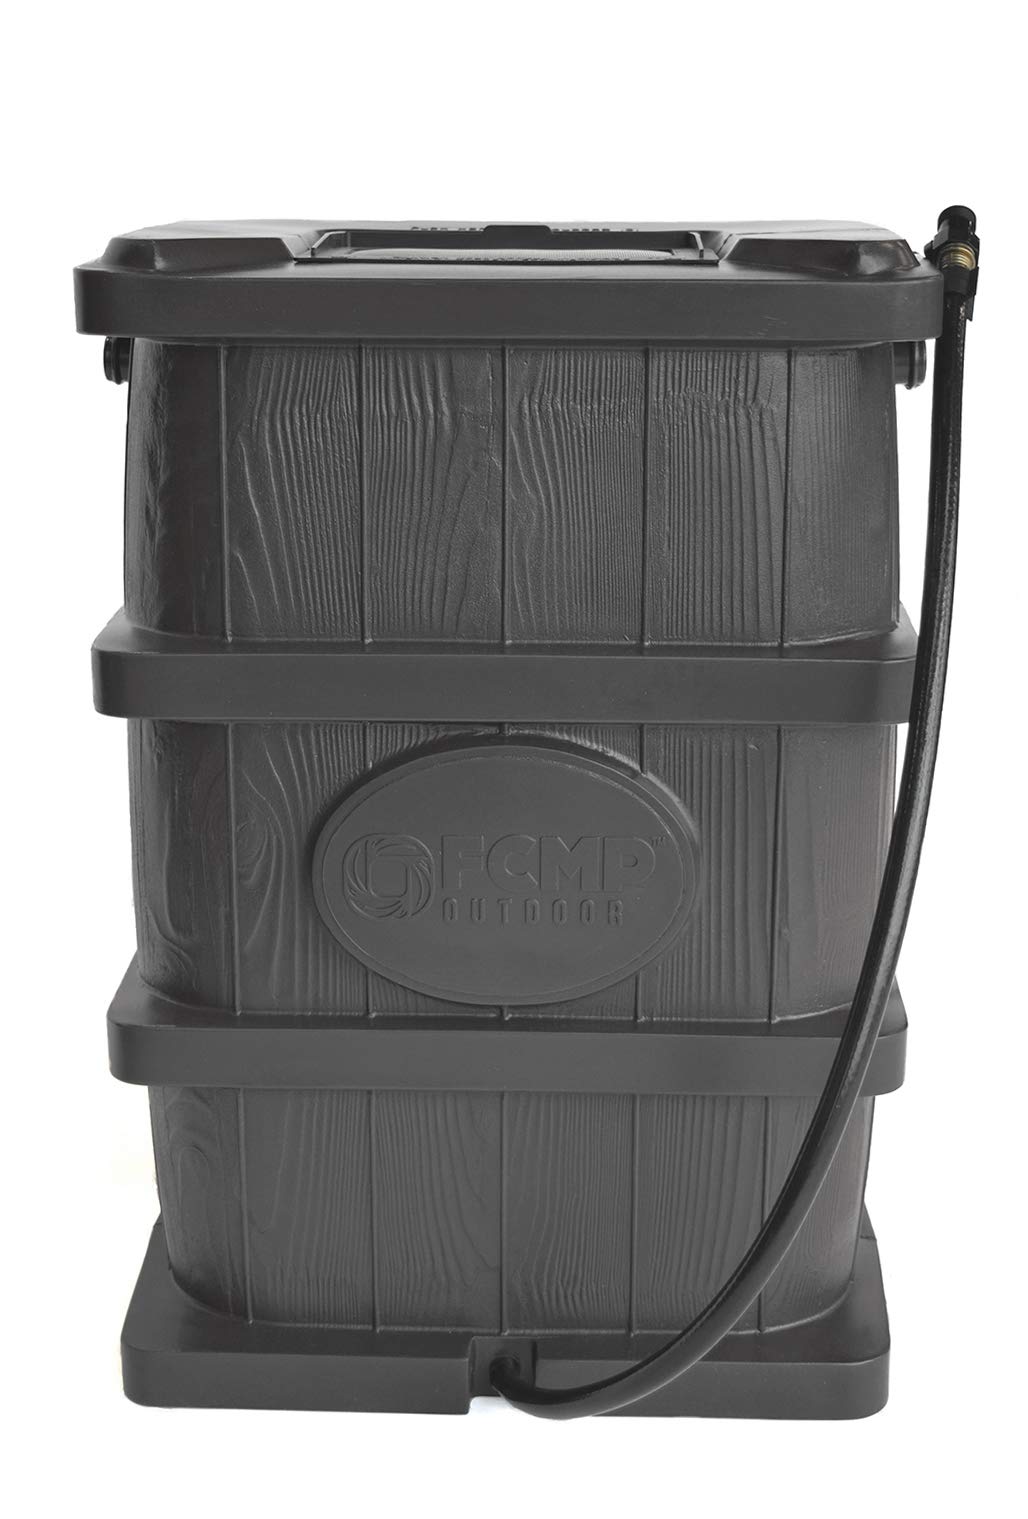 Best Rain Barrels Reviewed: Top Picks for Water Conservation in 2024